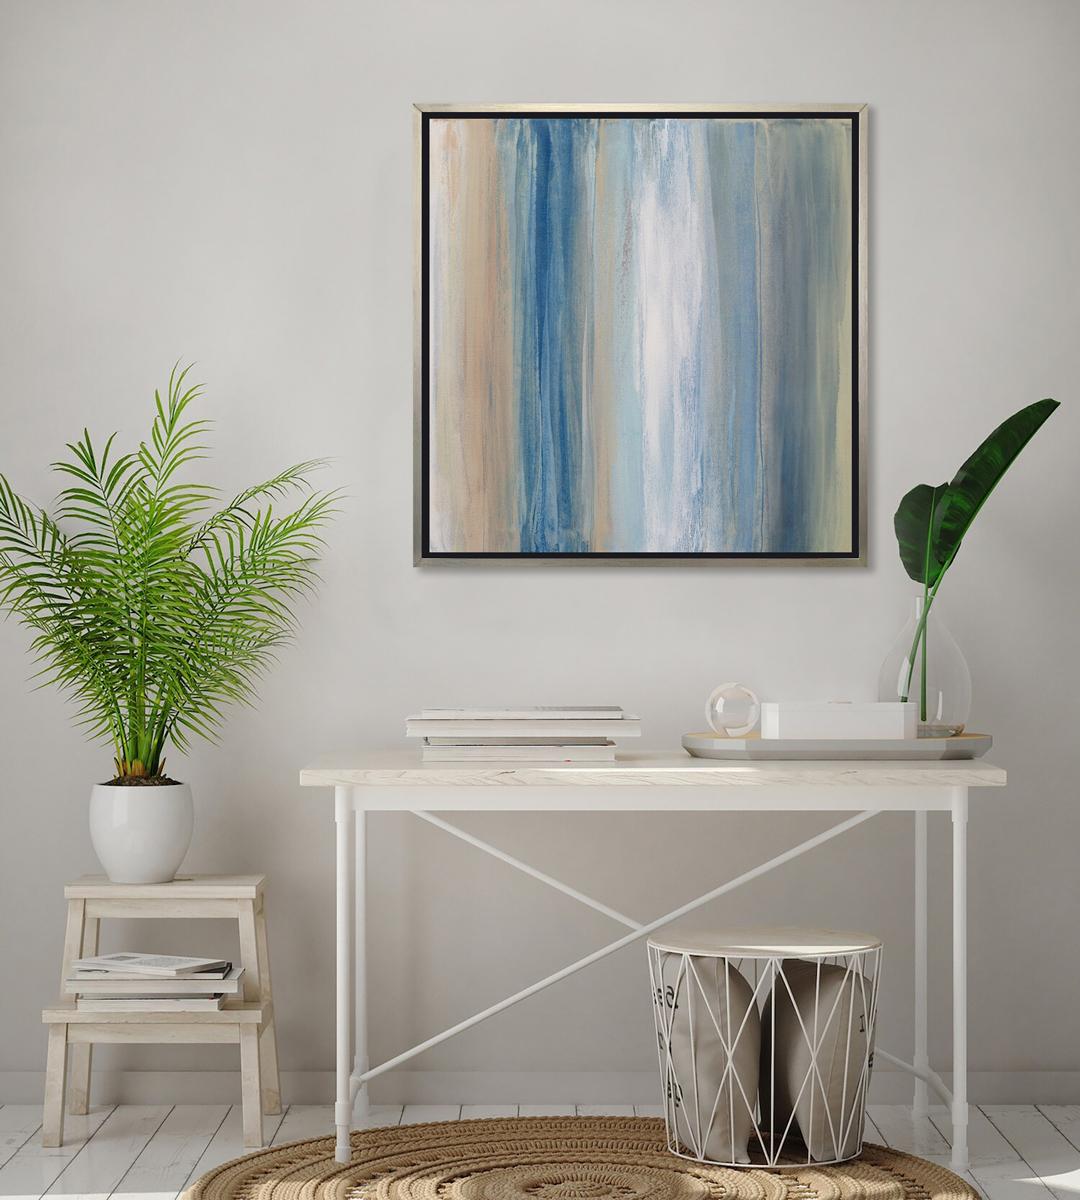 This contemporary limited edition print by Teodora Guererra features a colorful palette with white, muted orange, green, and varying blue tones layered in light, vertical strokes together for a balanced abstract composition. This print pairs